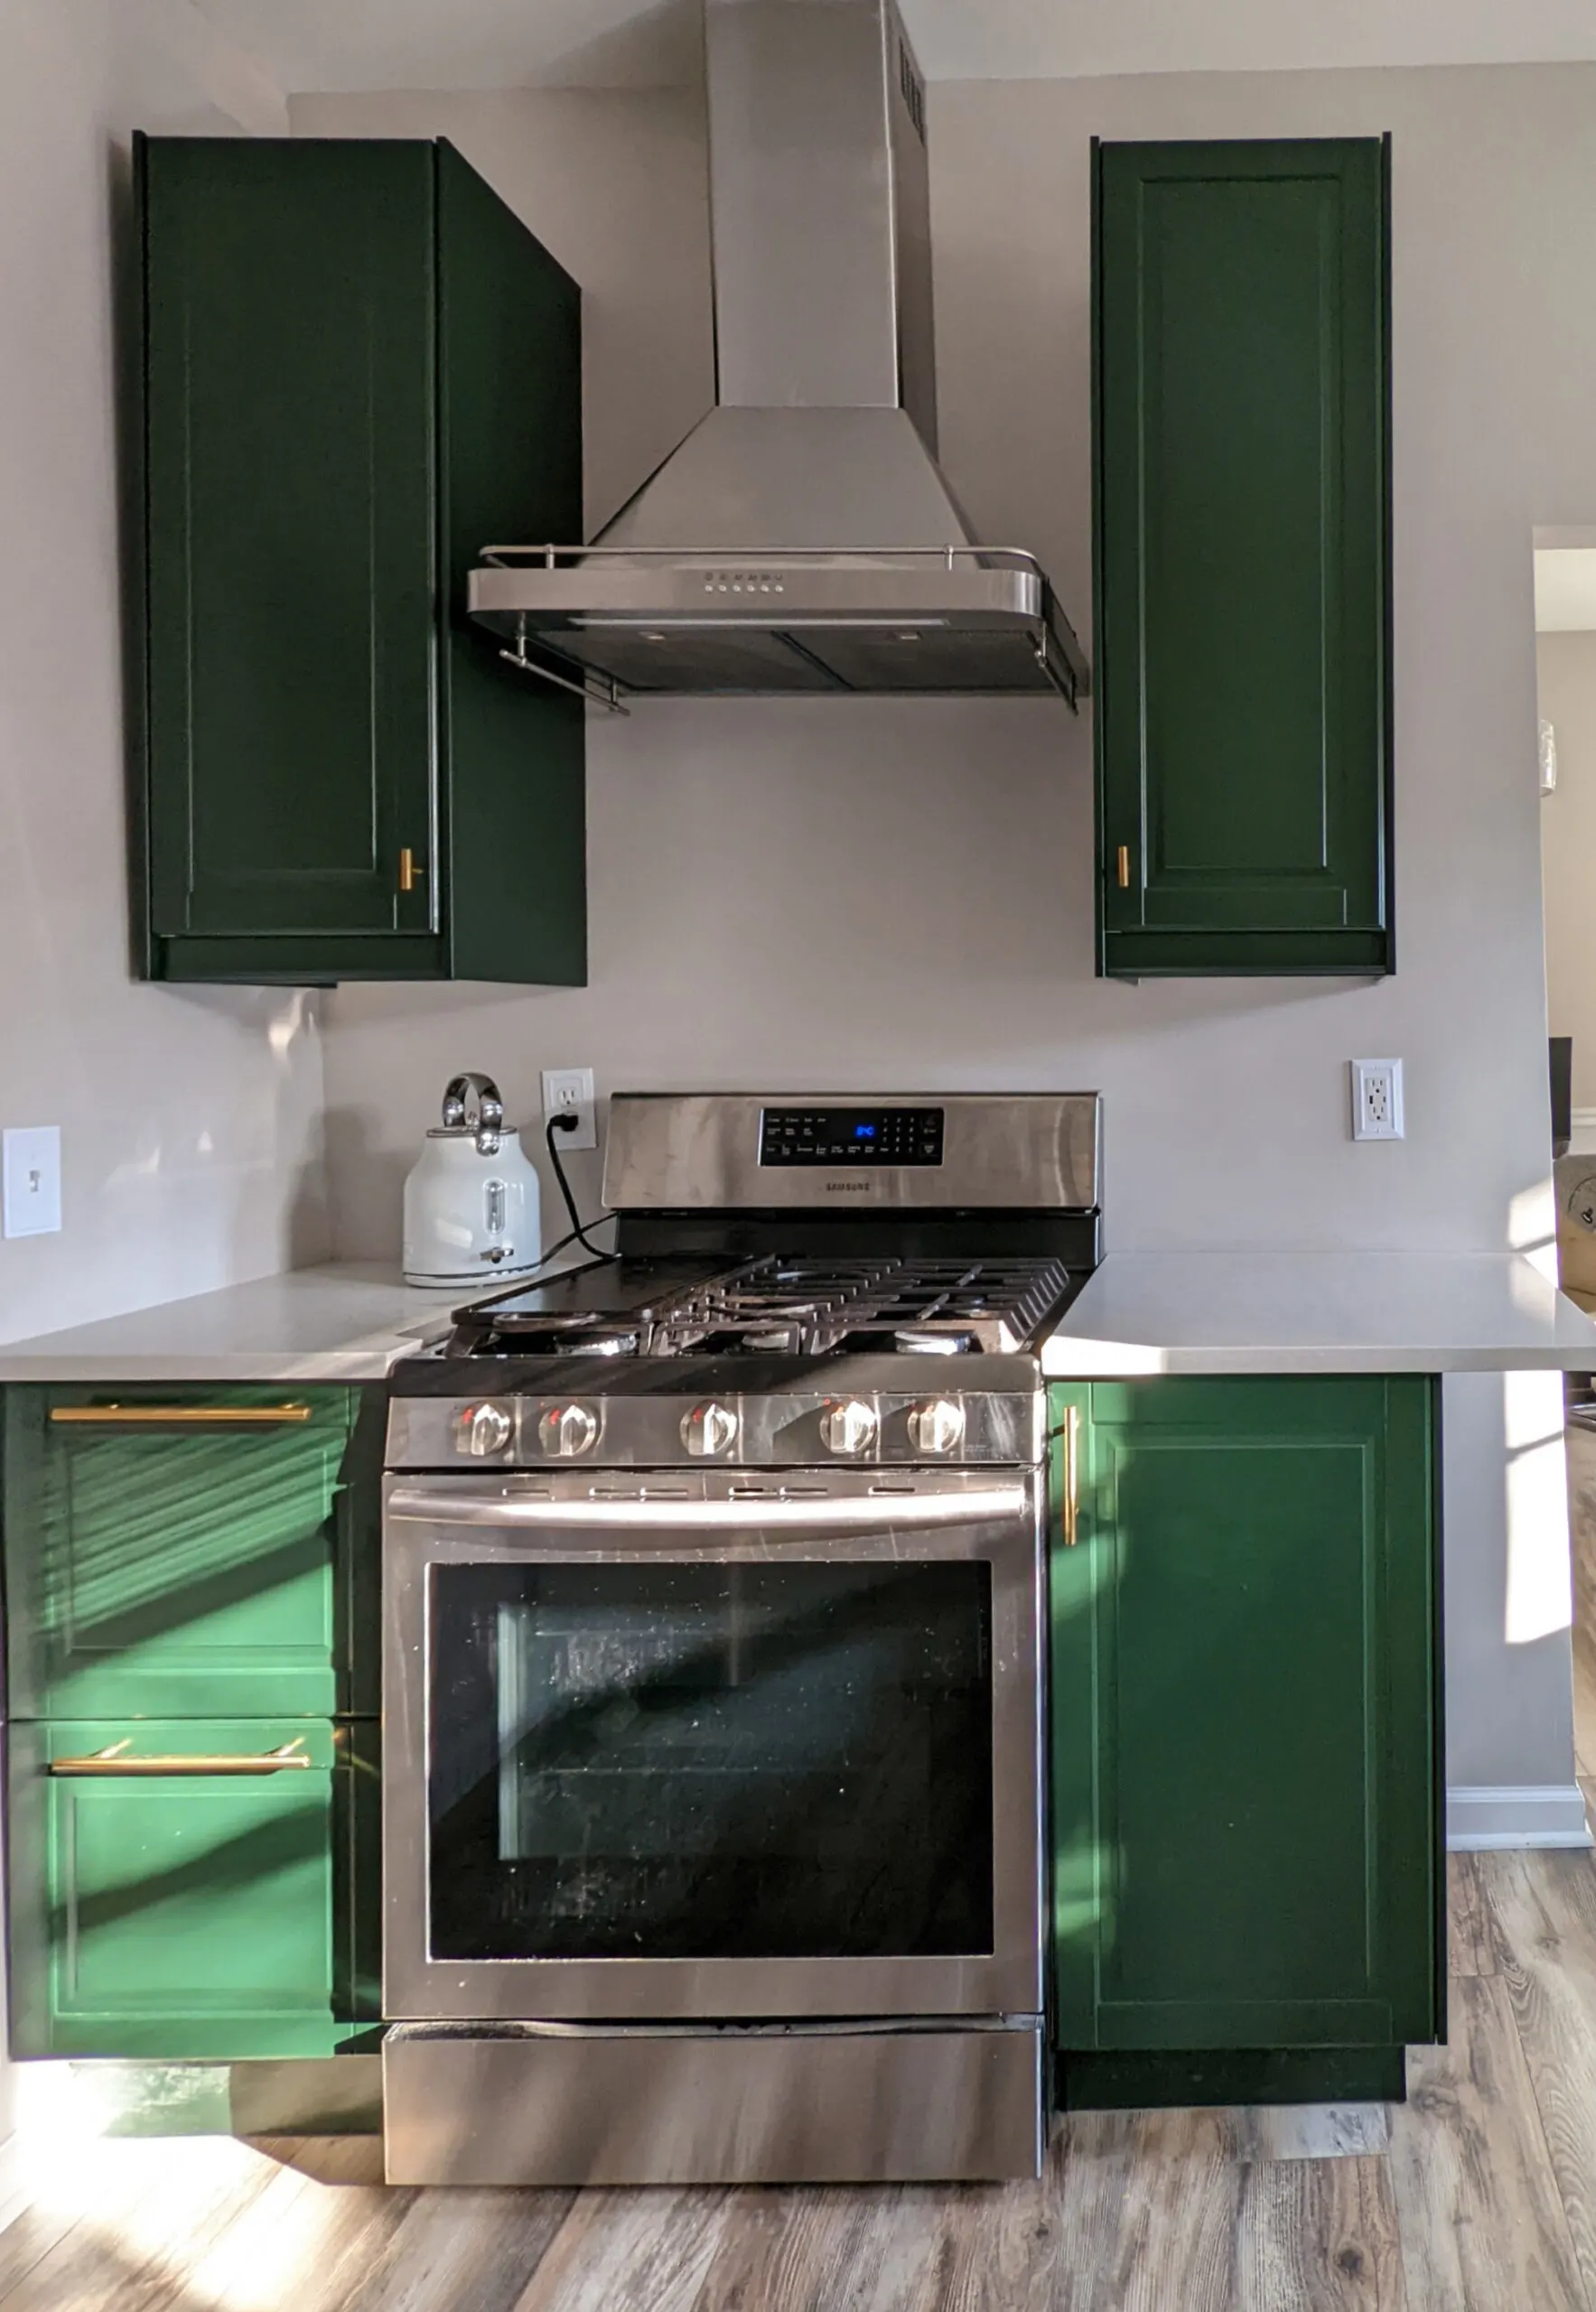 Of forest green cabinets with stainless steel range and hood.